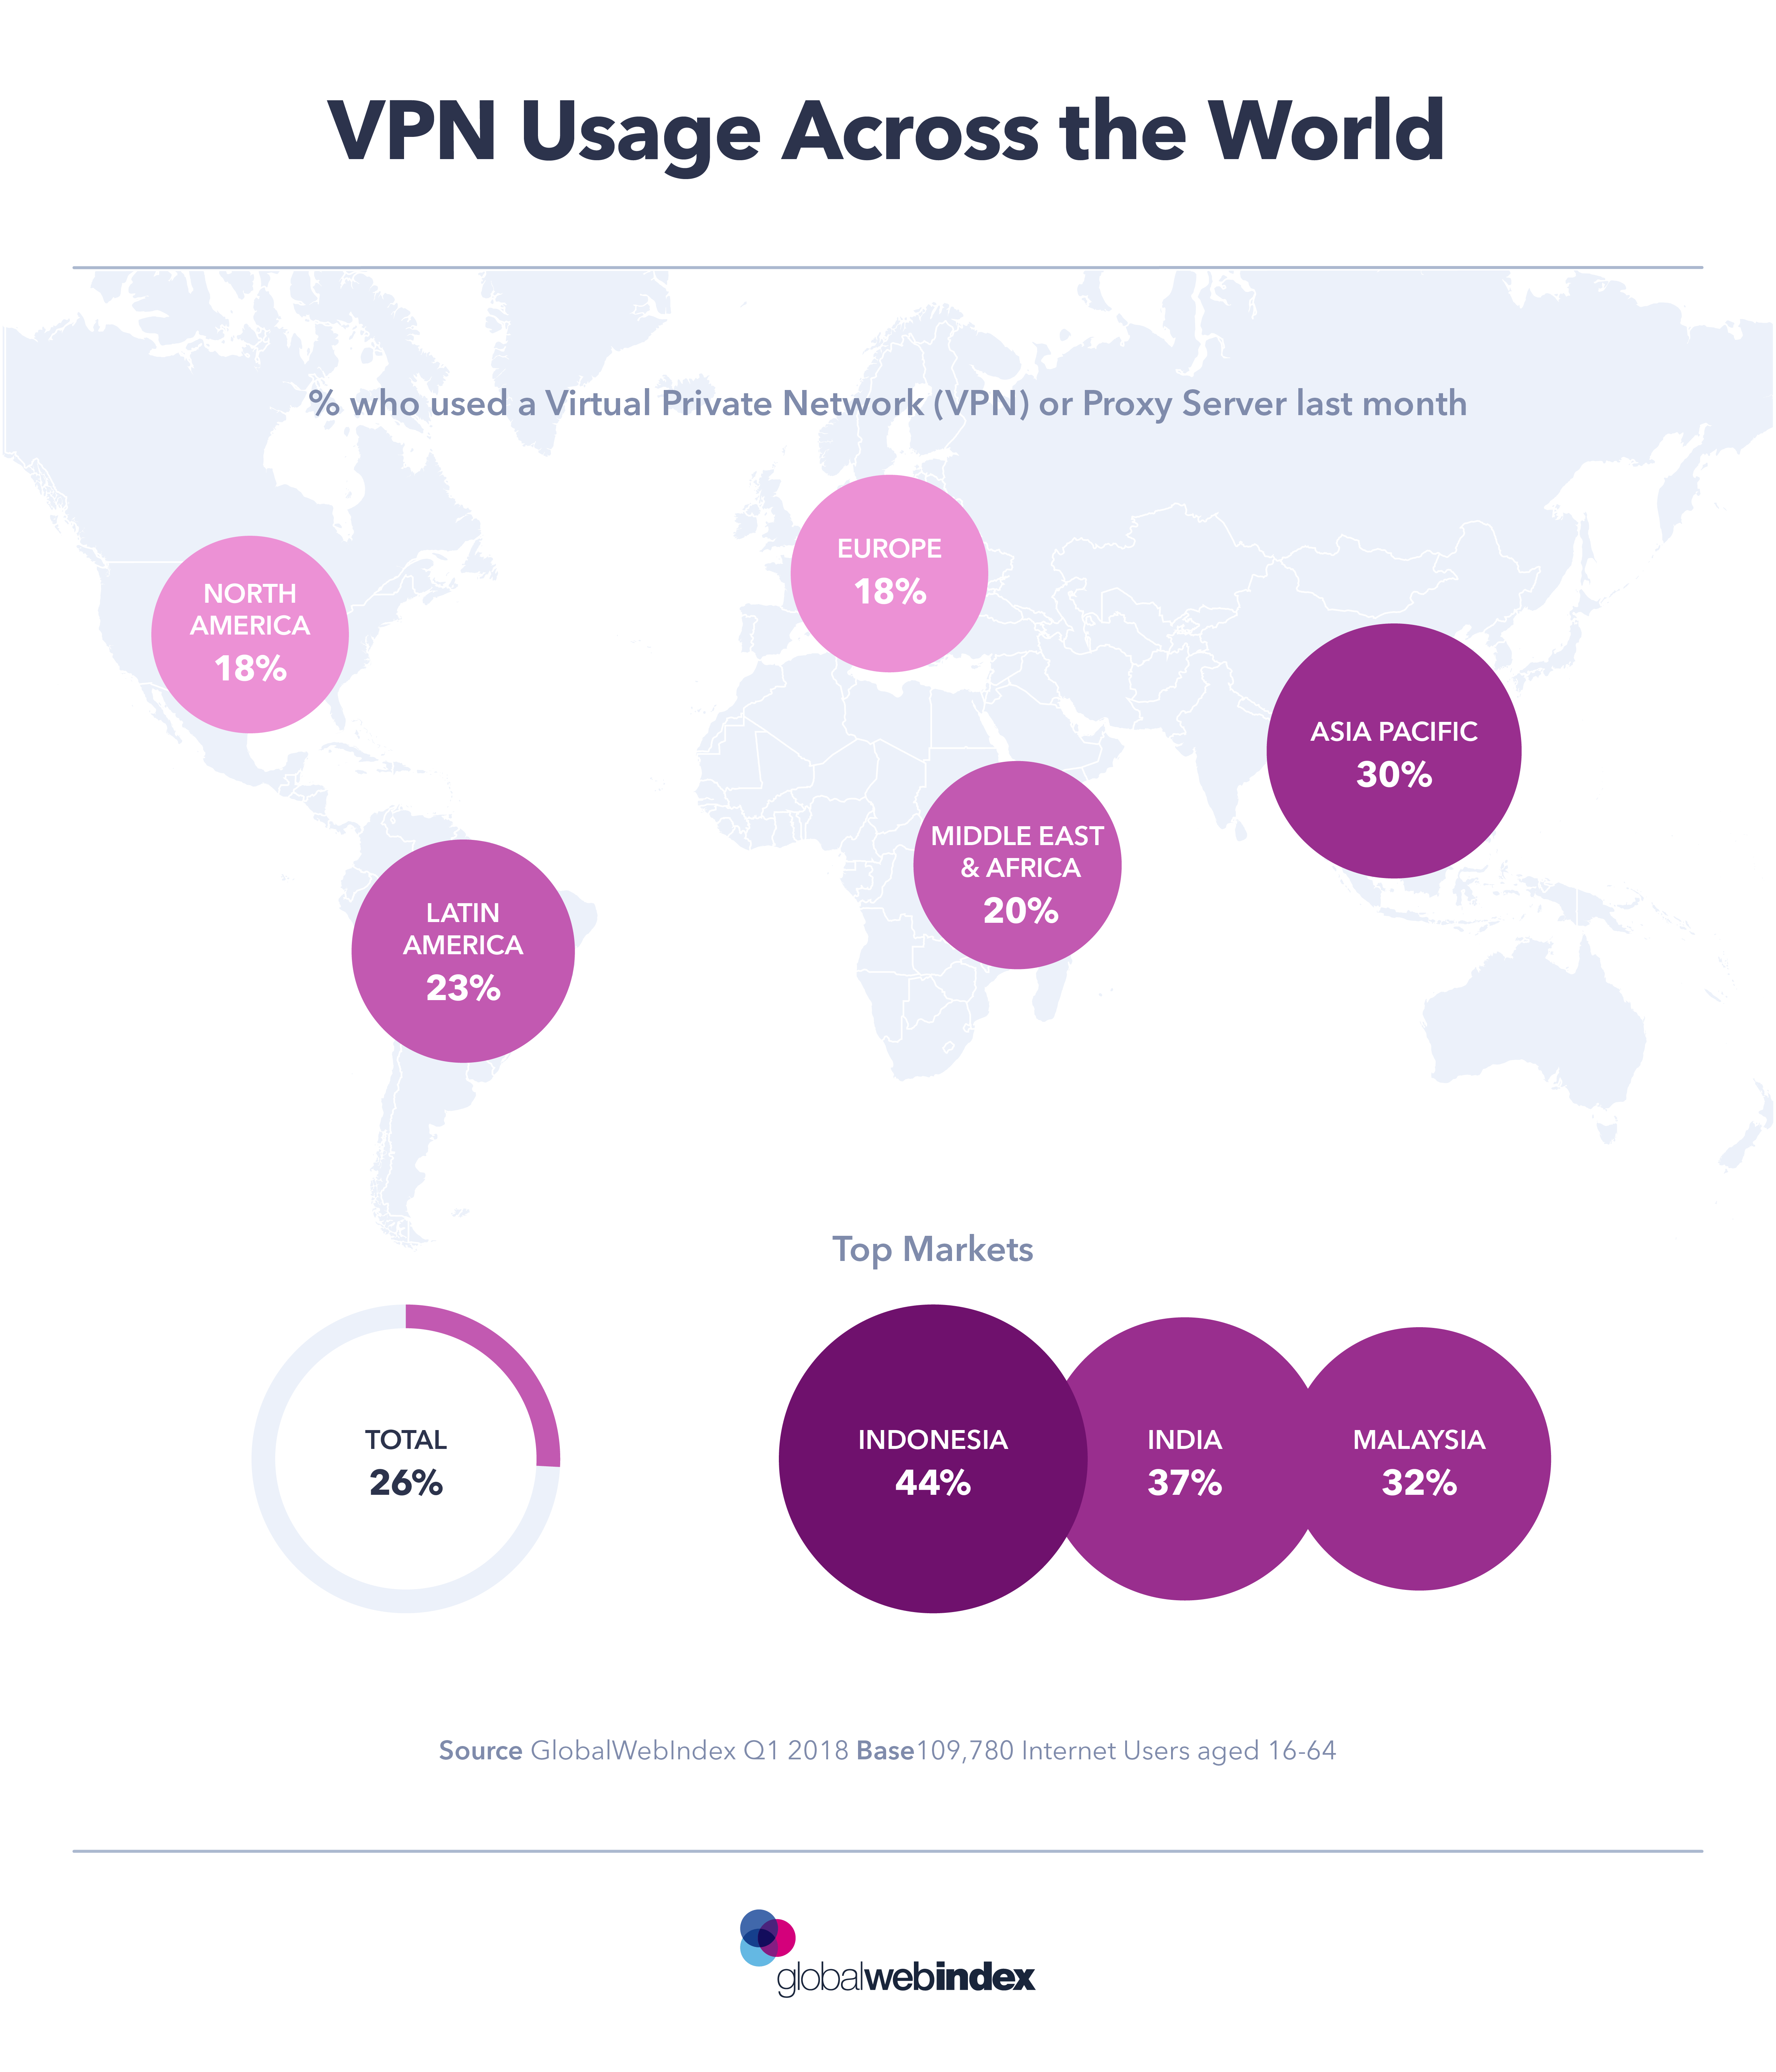 Percentage of people using VPNs in different continents